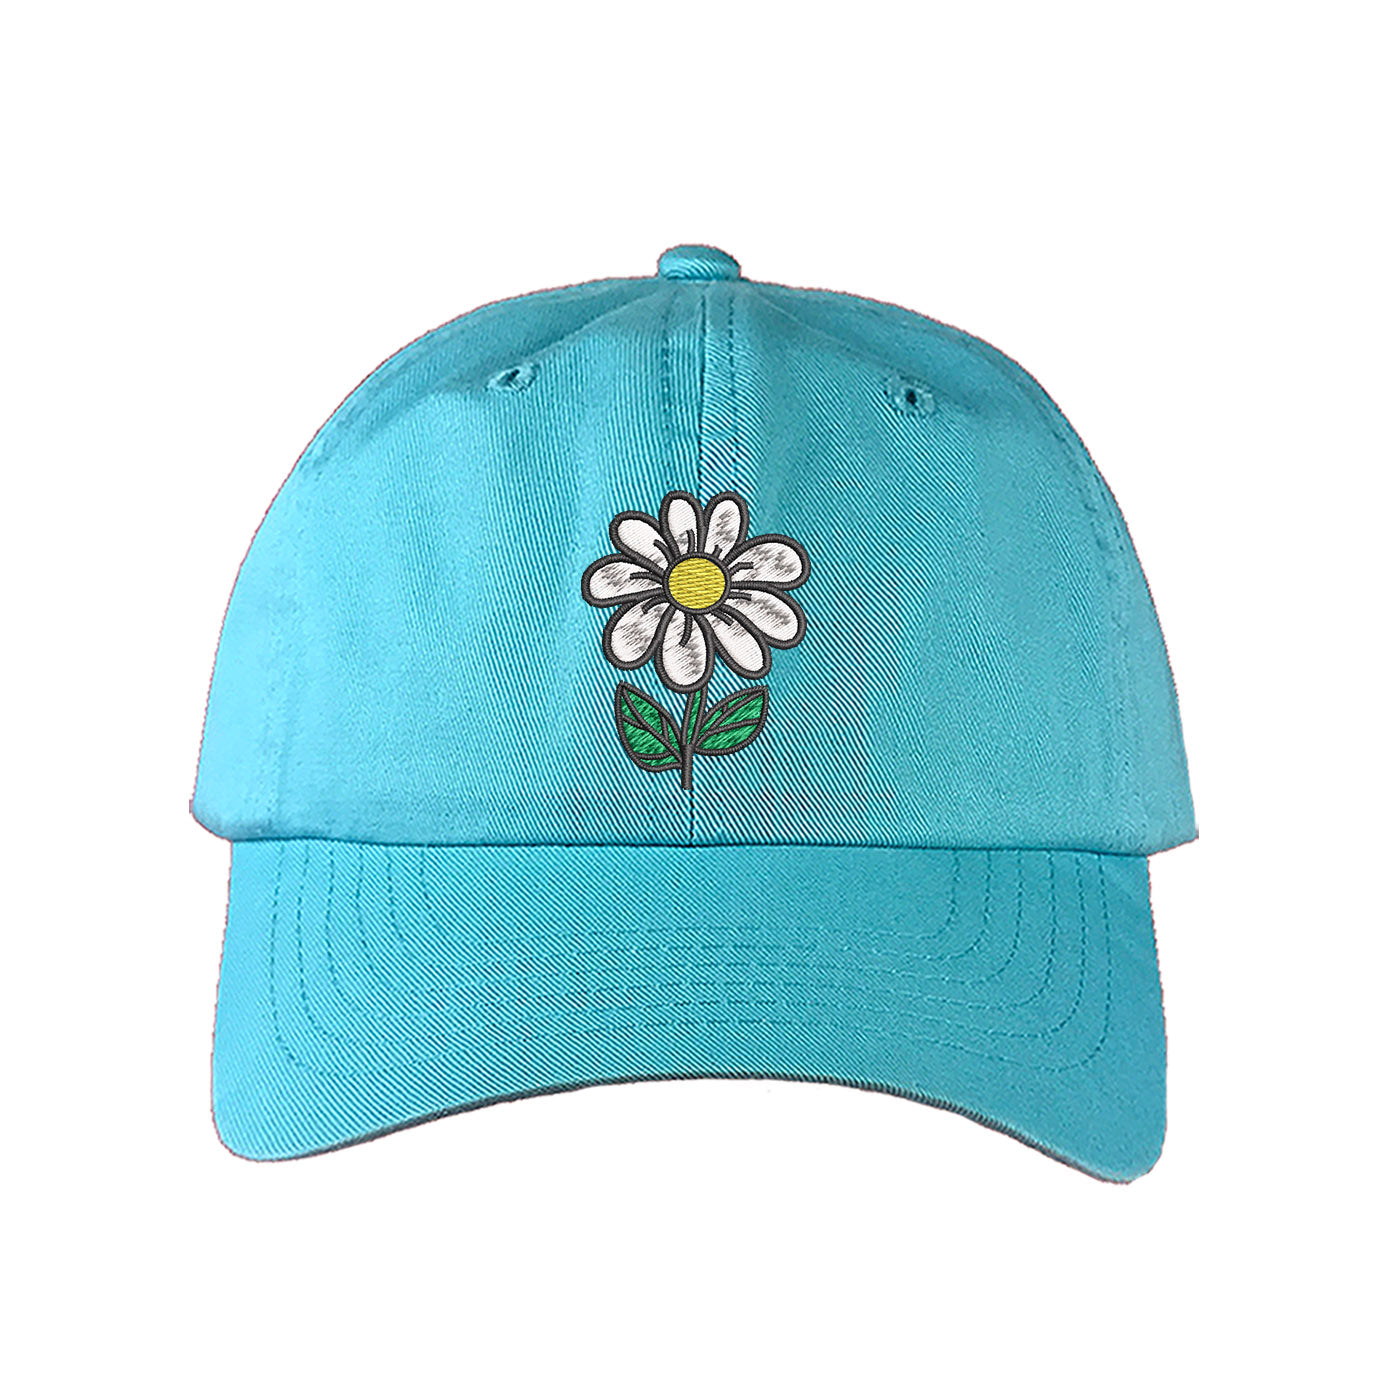 Cyan Blue Baseball Cap embroidered with a daisy flower with stem - DSY Lifestyle